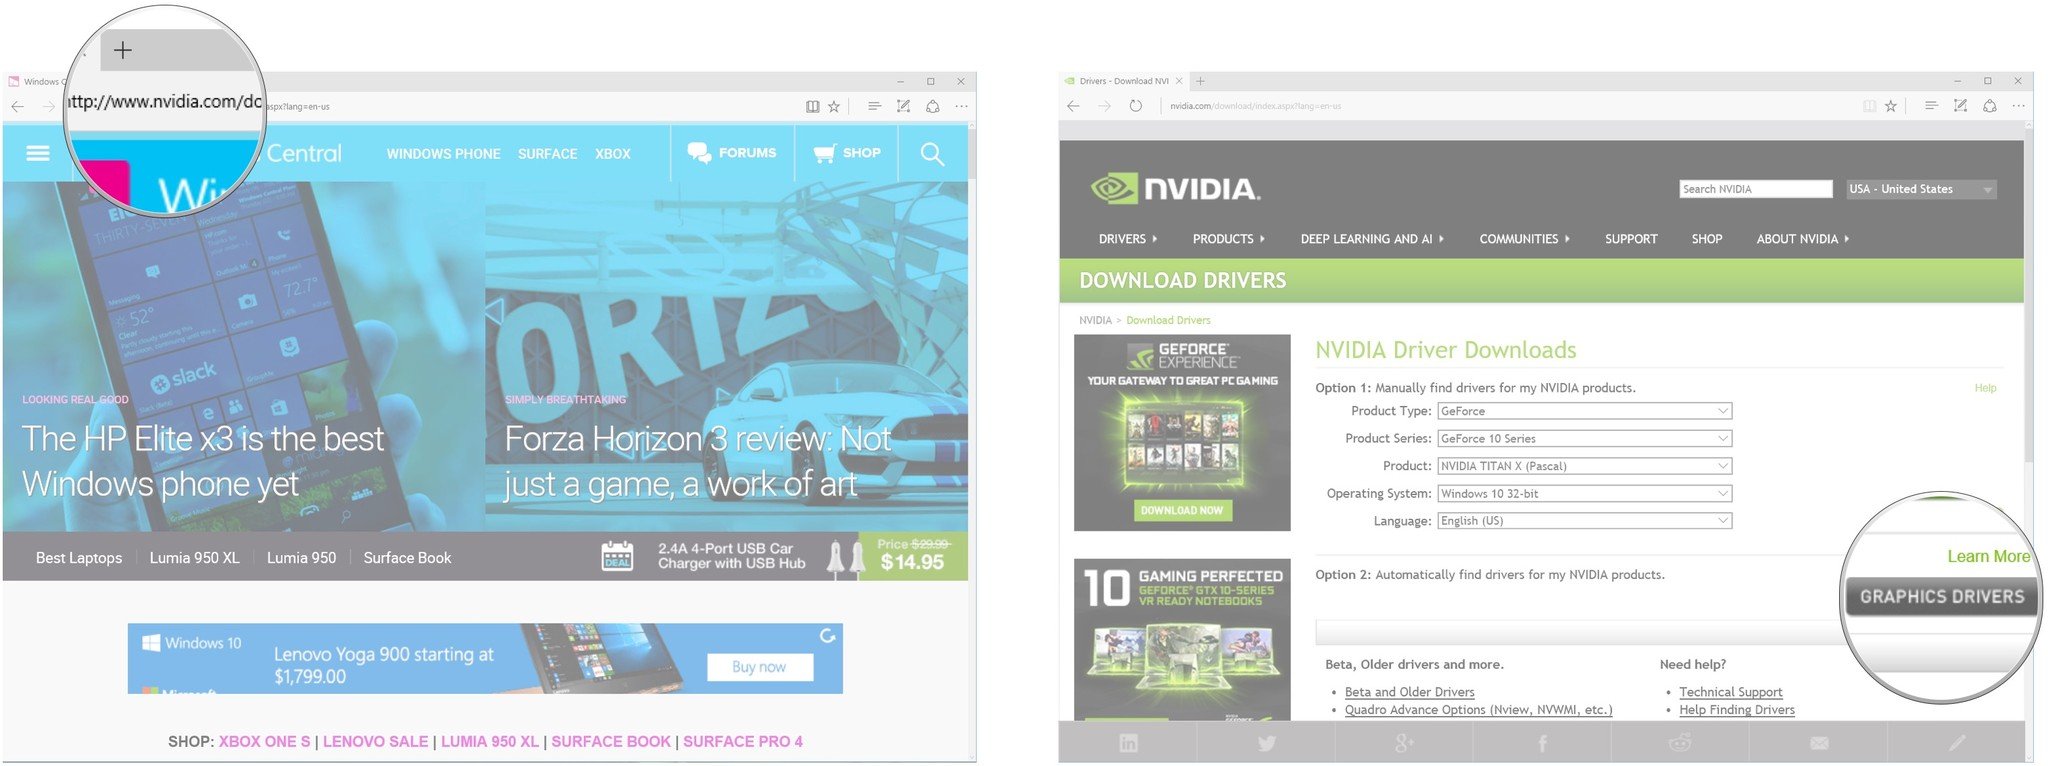 Navigate to the NVIDIA driver support page. Click Graphics Drivers.